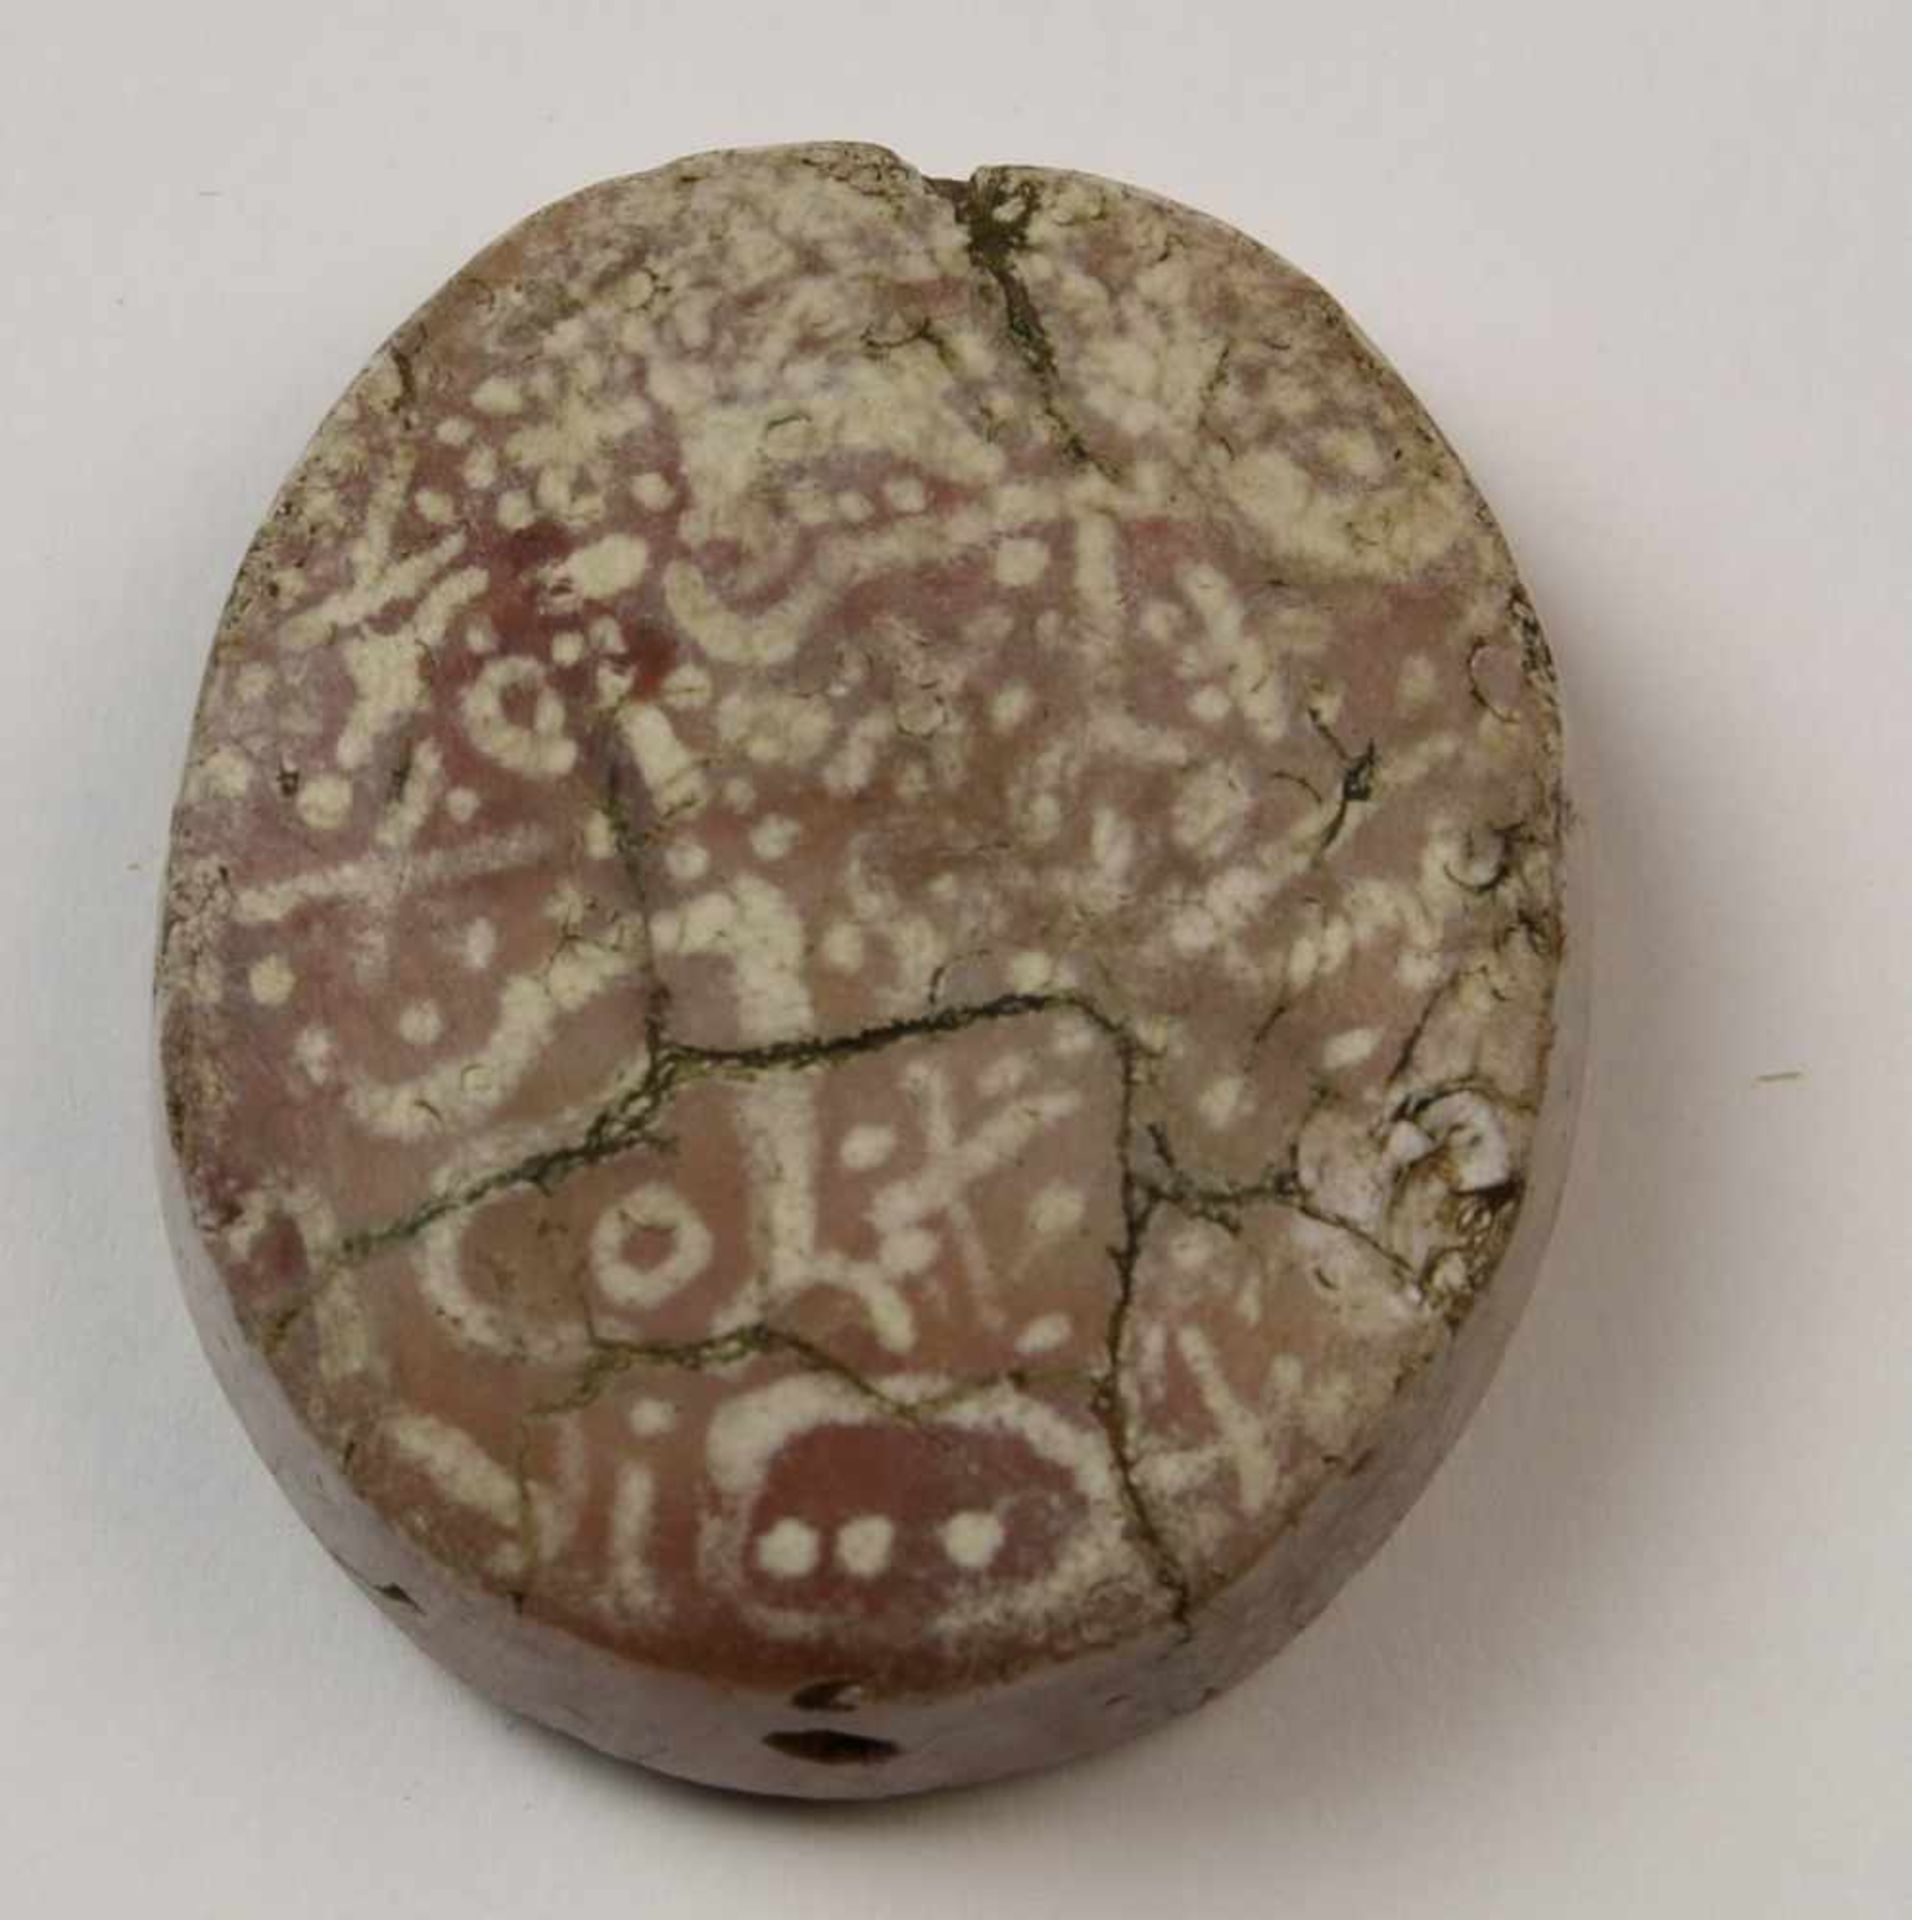 Etched agate disc shaped bead, possibly Mohenjo Daro, Paikstan, 2500-1500 BC.with etched line